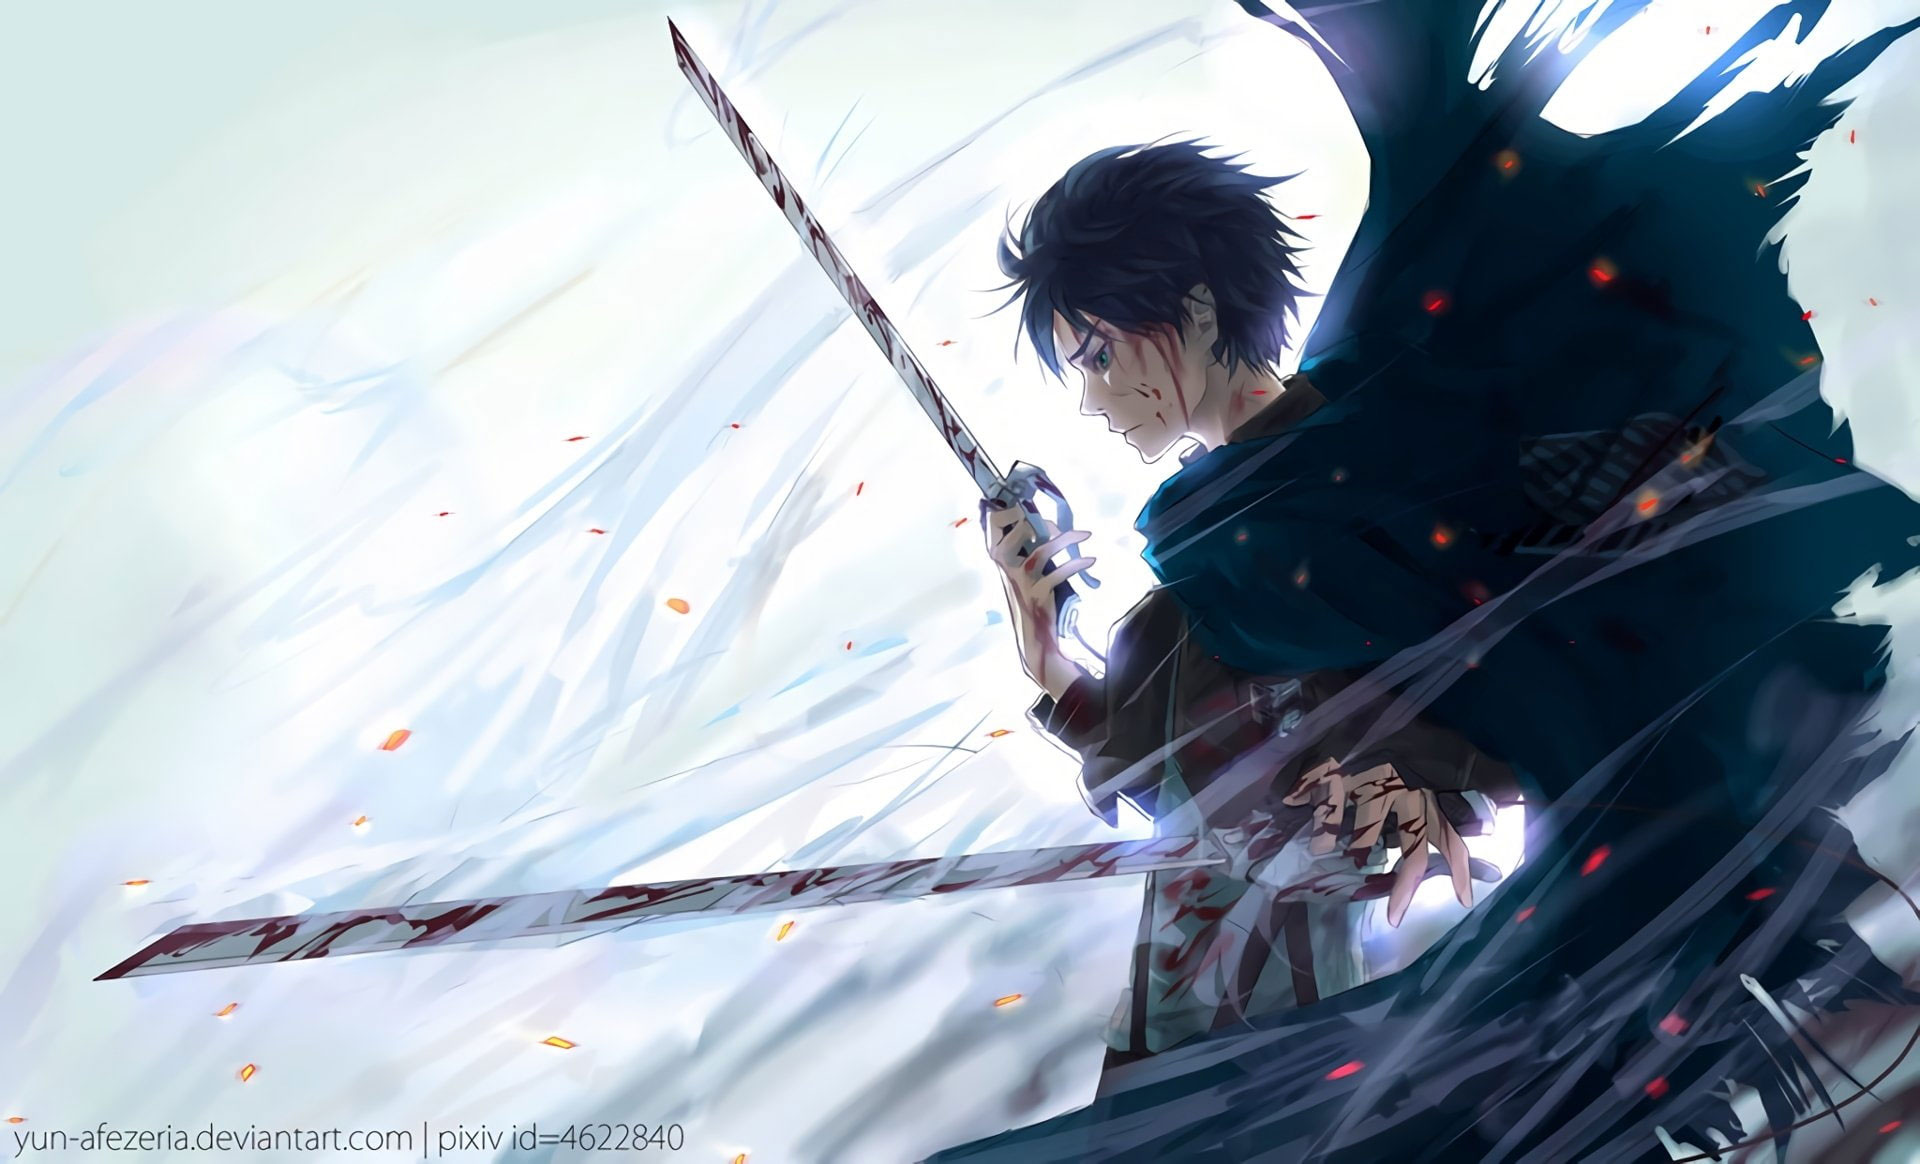 Wallpaper Black Haired Male Anime Character Wallpaper For You Hd Wallpaper For Desktop Mobile